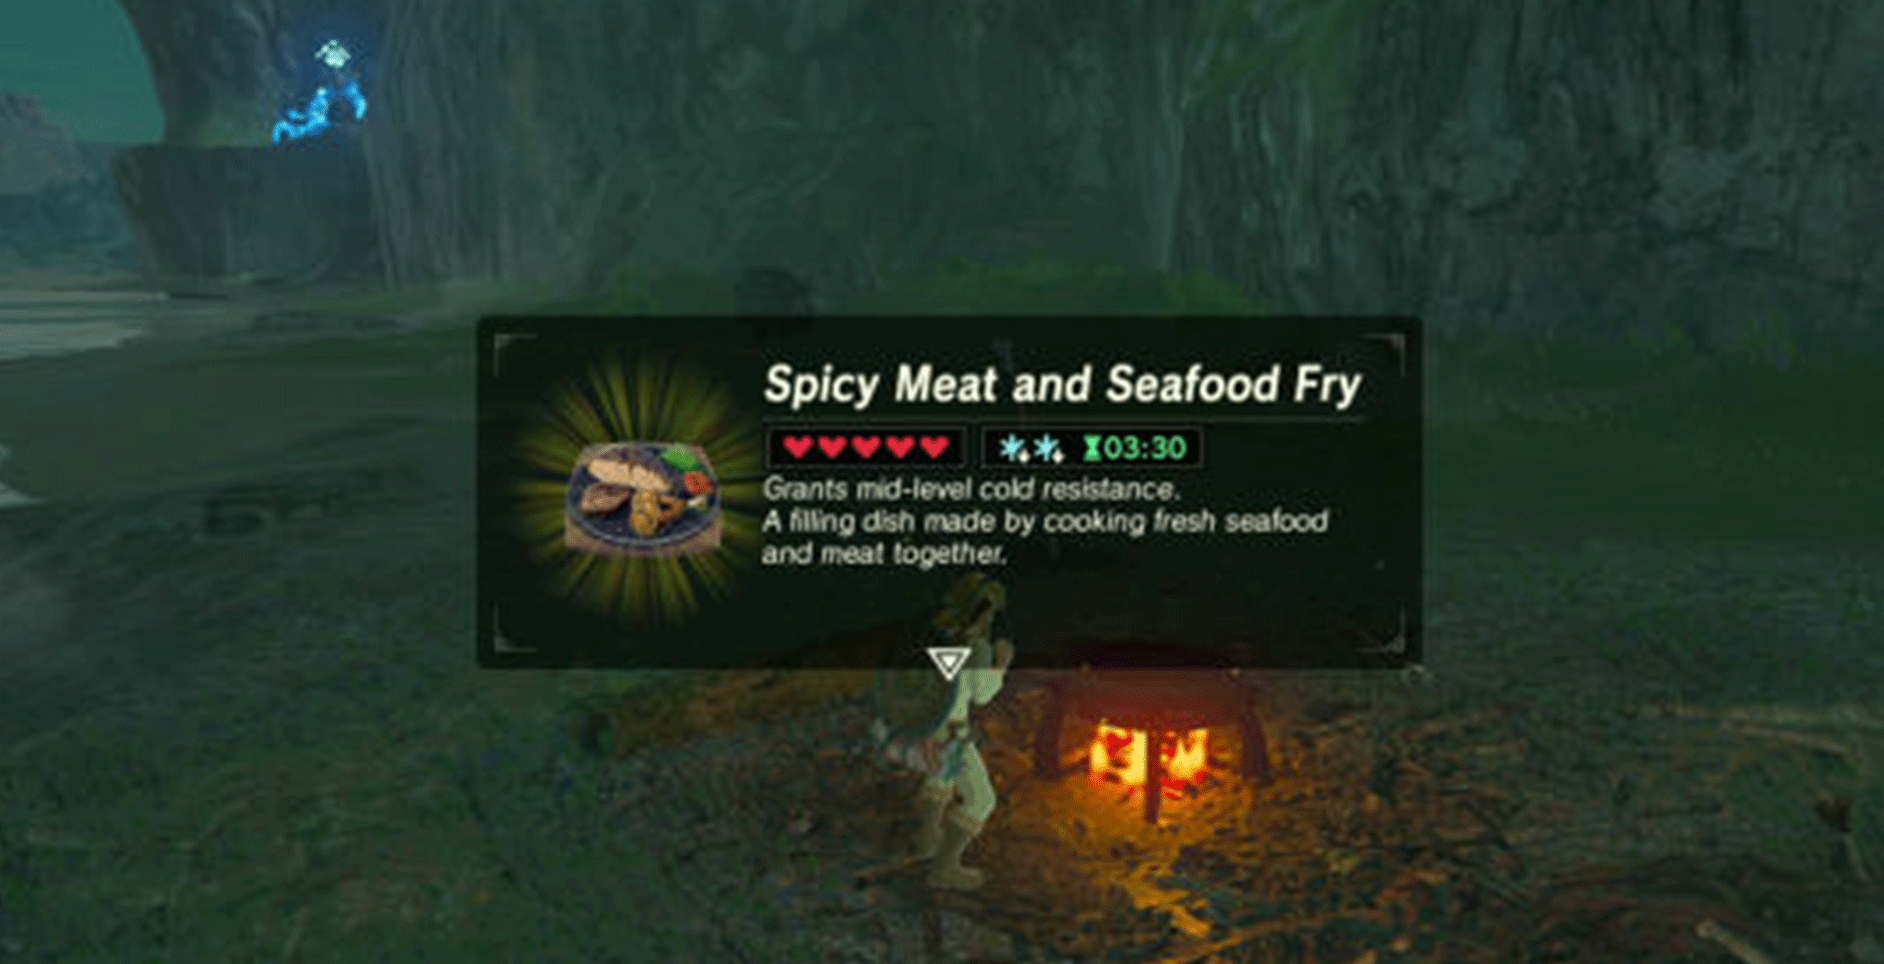 Spicy-Meat-and-Seafood-Fry